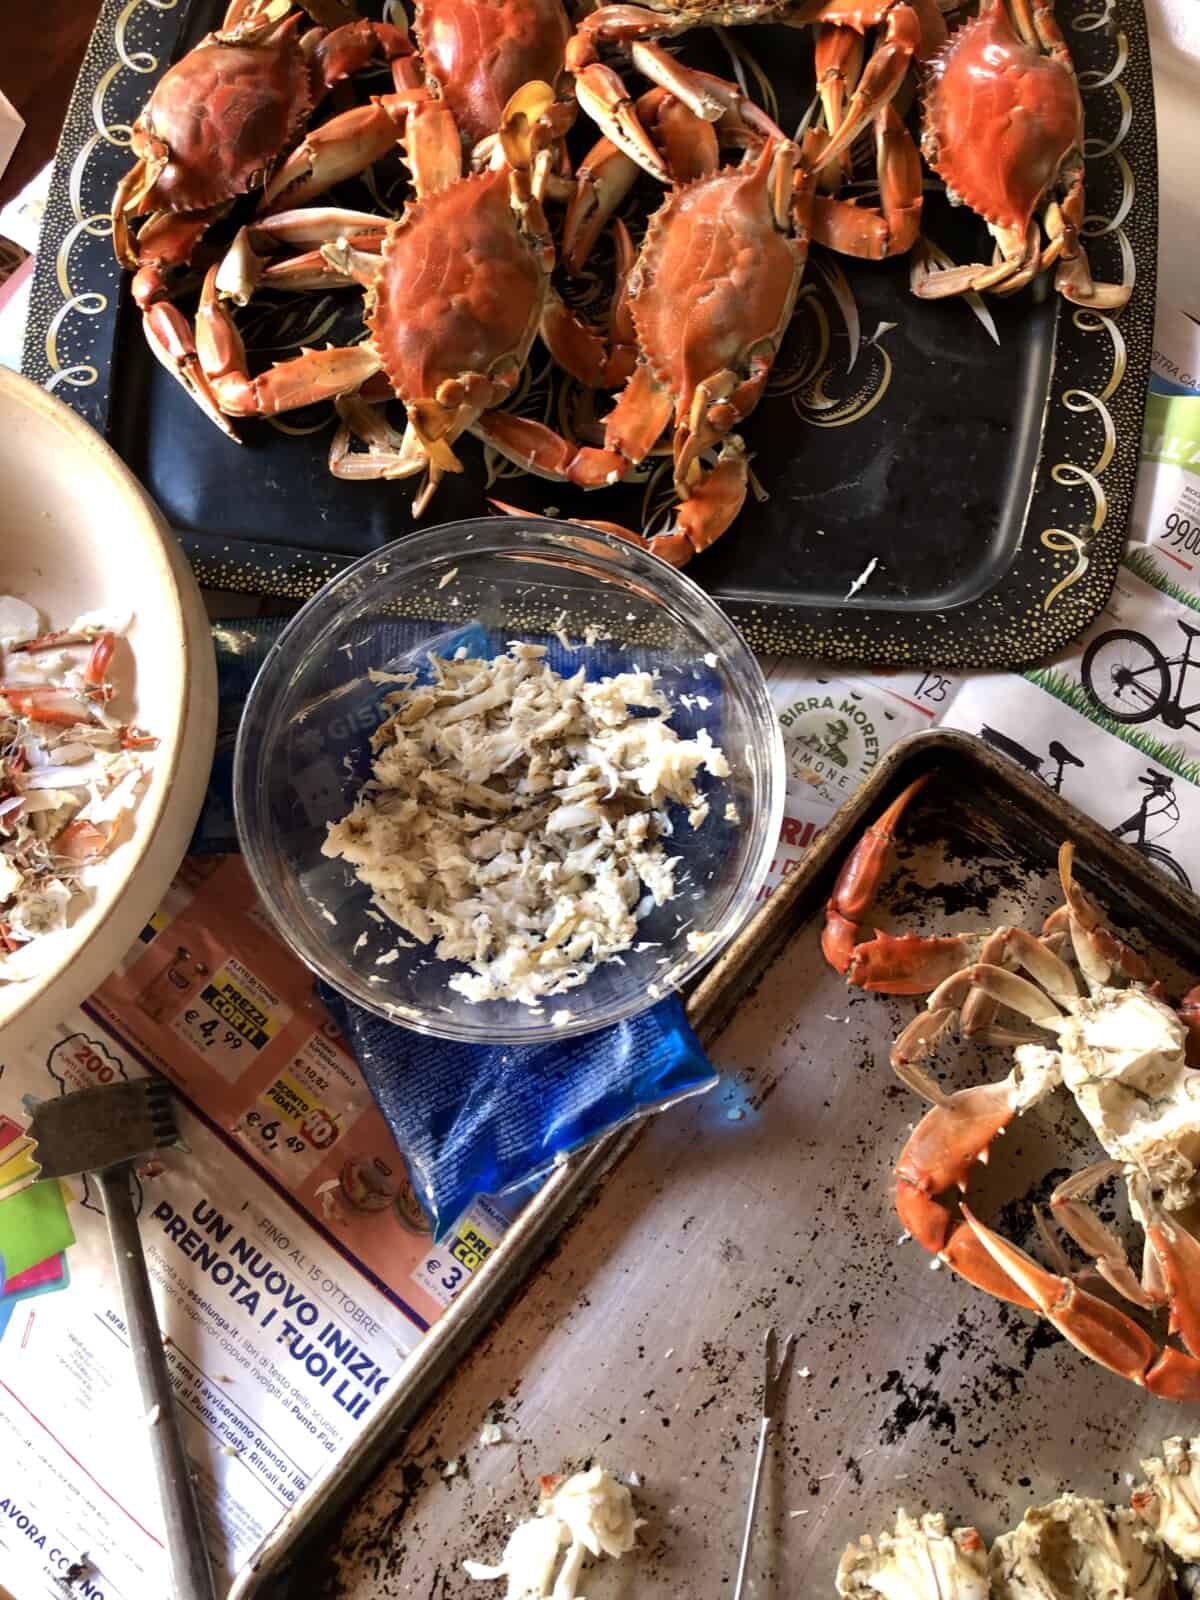 A table with sheet tray containing whole boiled crabs, a bowl with shells in it, another bowl on top of frozen gel packs to hold picked crab meat and keep it cold, a sheet tray with crabs that were cleaned before being cooked, a meat mallet, and a fondue fork (crab fork) all on top of newspaper.